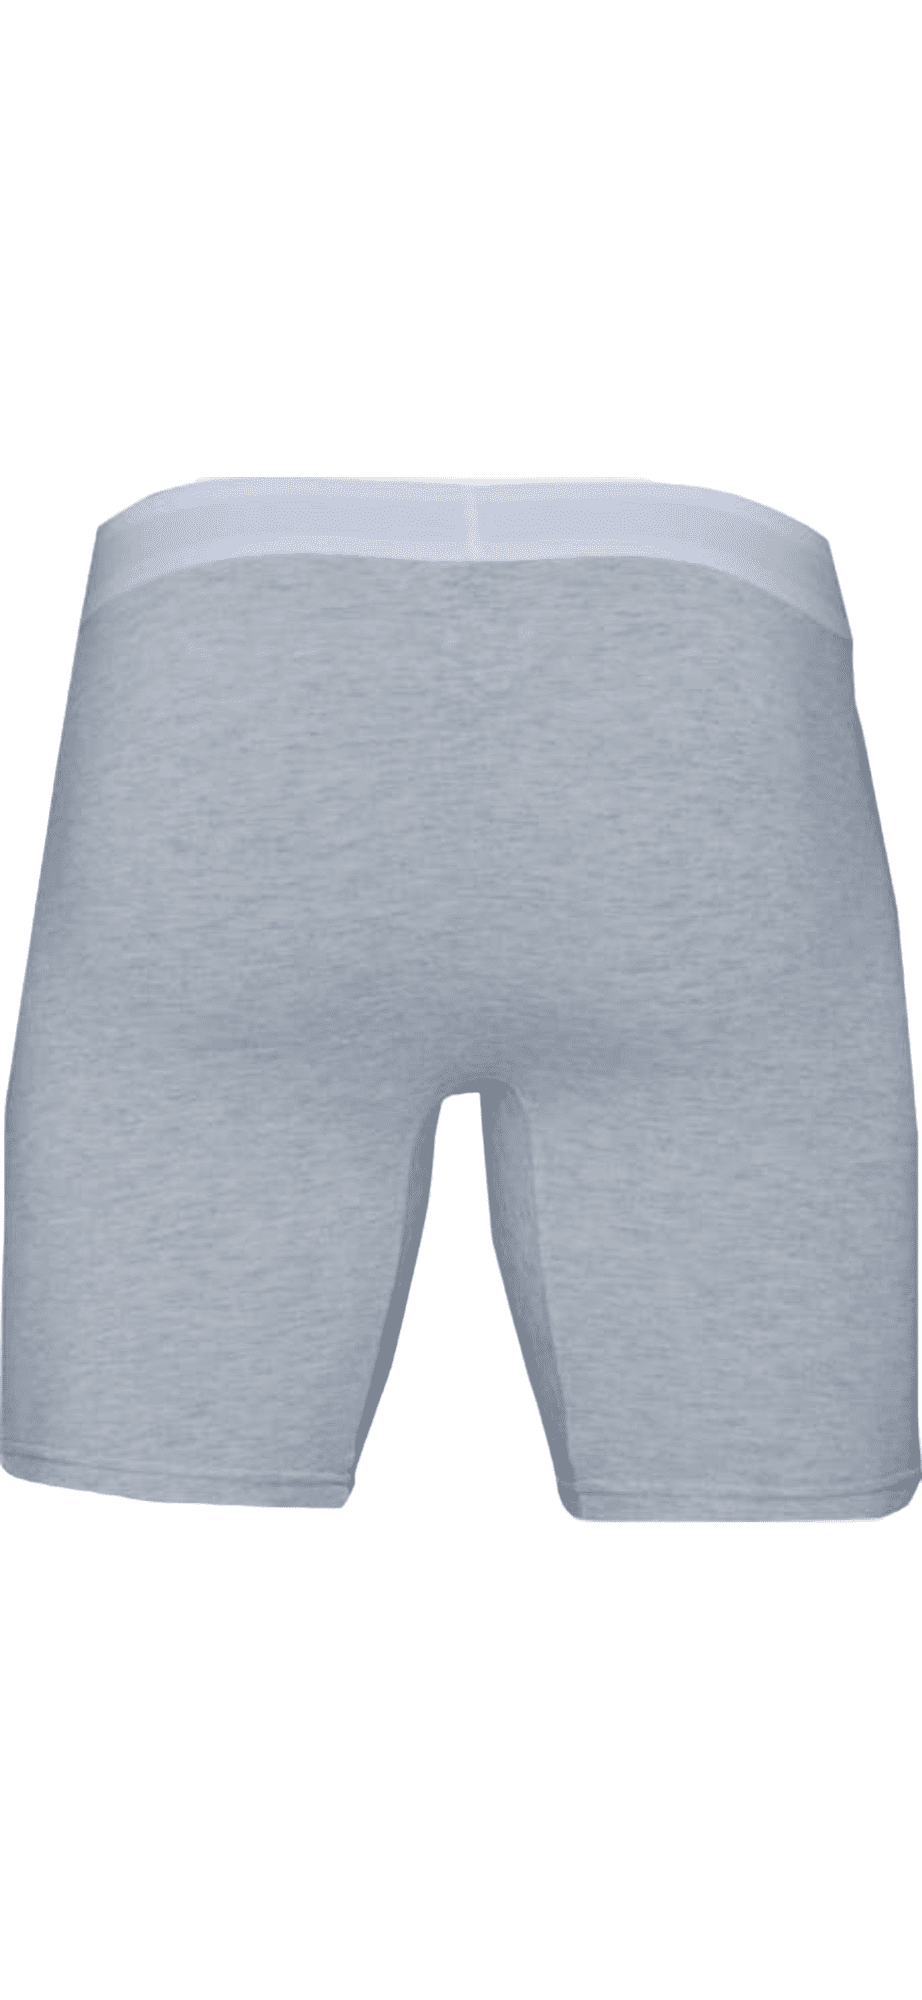 Wood Premium Biker Brief Heather Grey — Genuine Design Luxury Consignment Calgary, Alberta, Canada New and Pre-Owned Clothing, Shoes, Accessories.